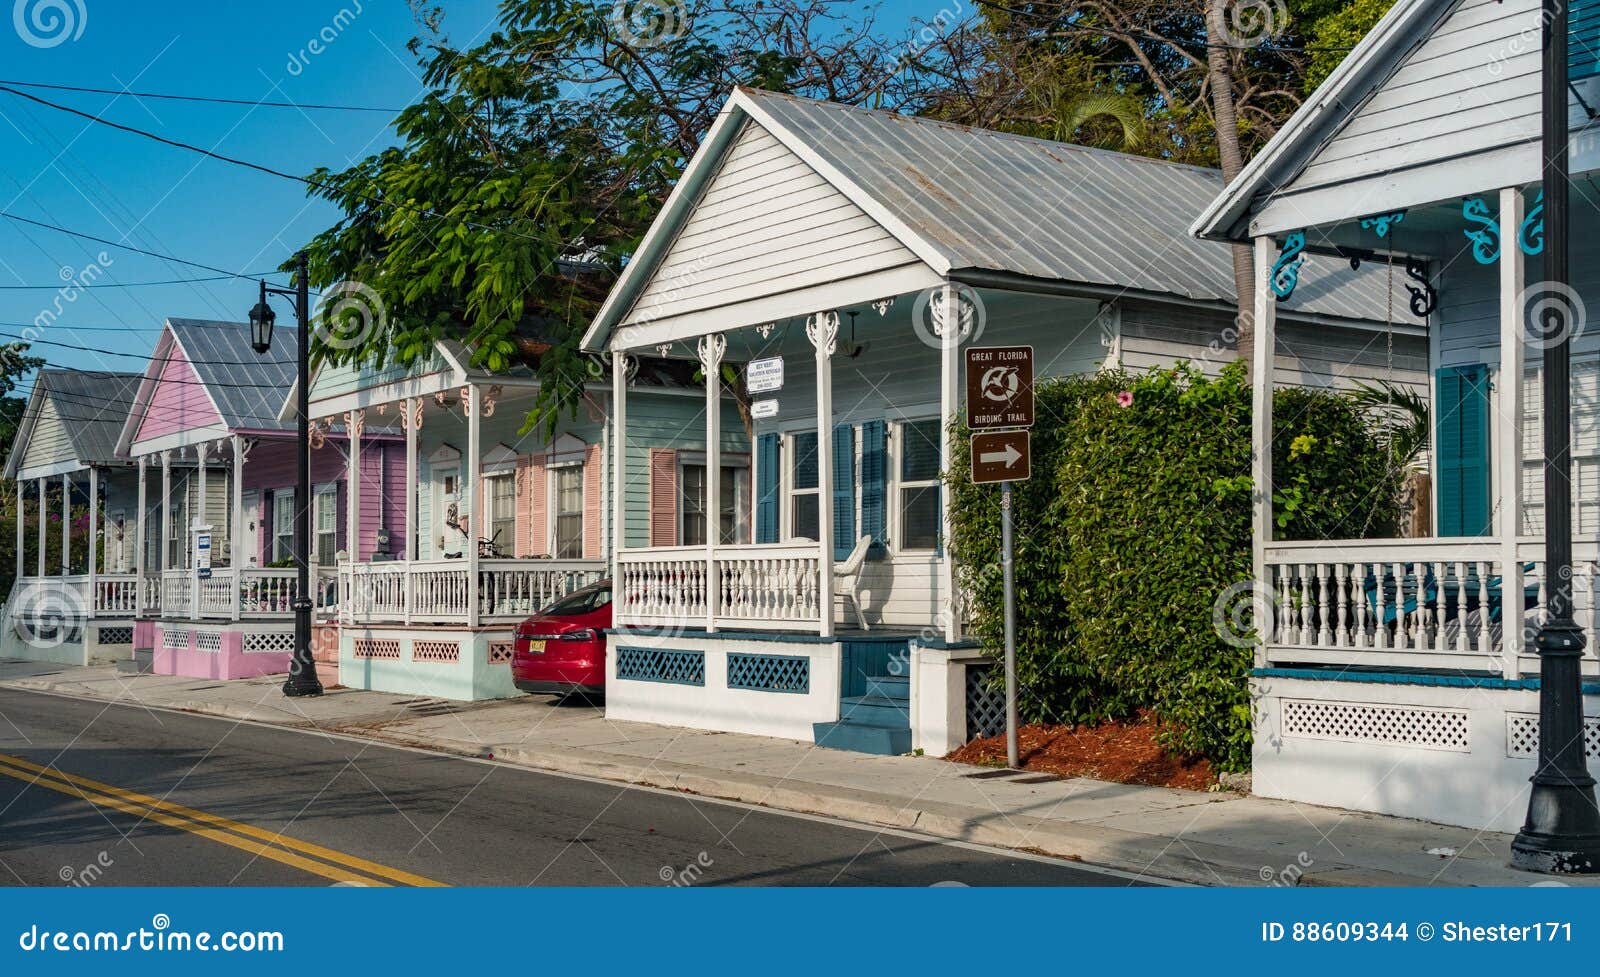 January 24 2017 Key West Fl View Of Conch Houses Editorial Stock